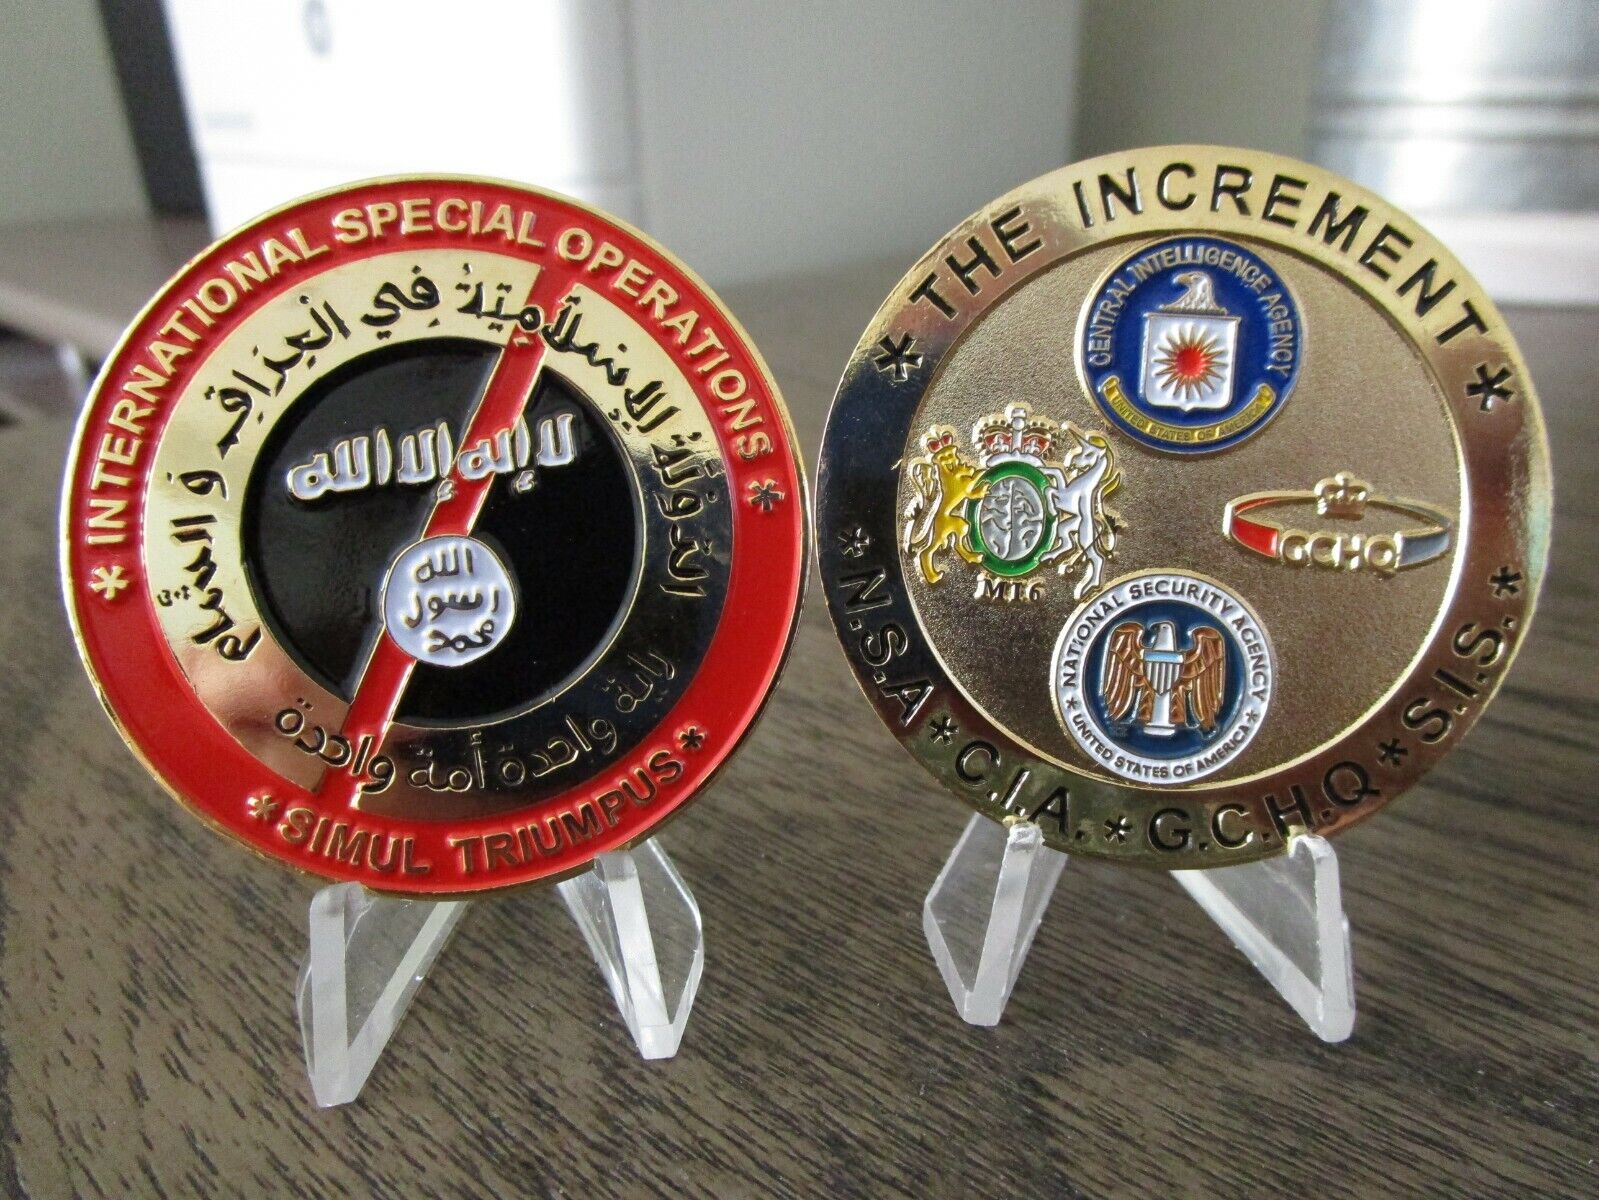 International Special Operations The Increment NSA CIA GCHQ SIS Challenge Coin